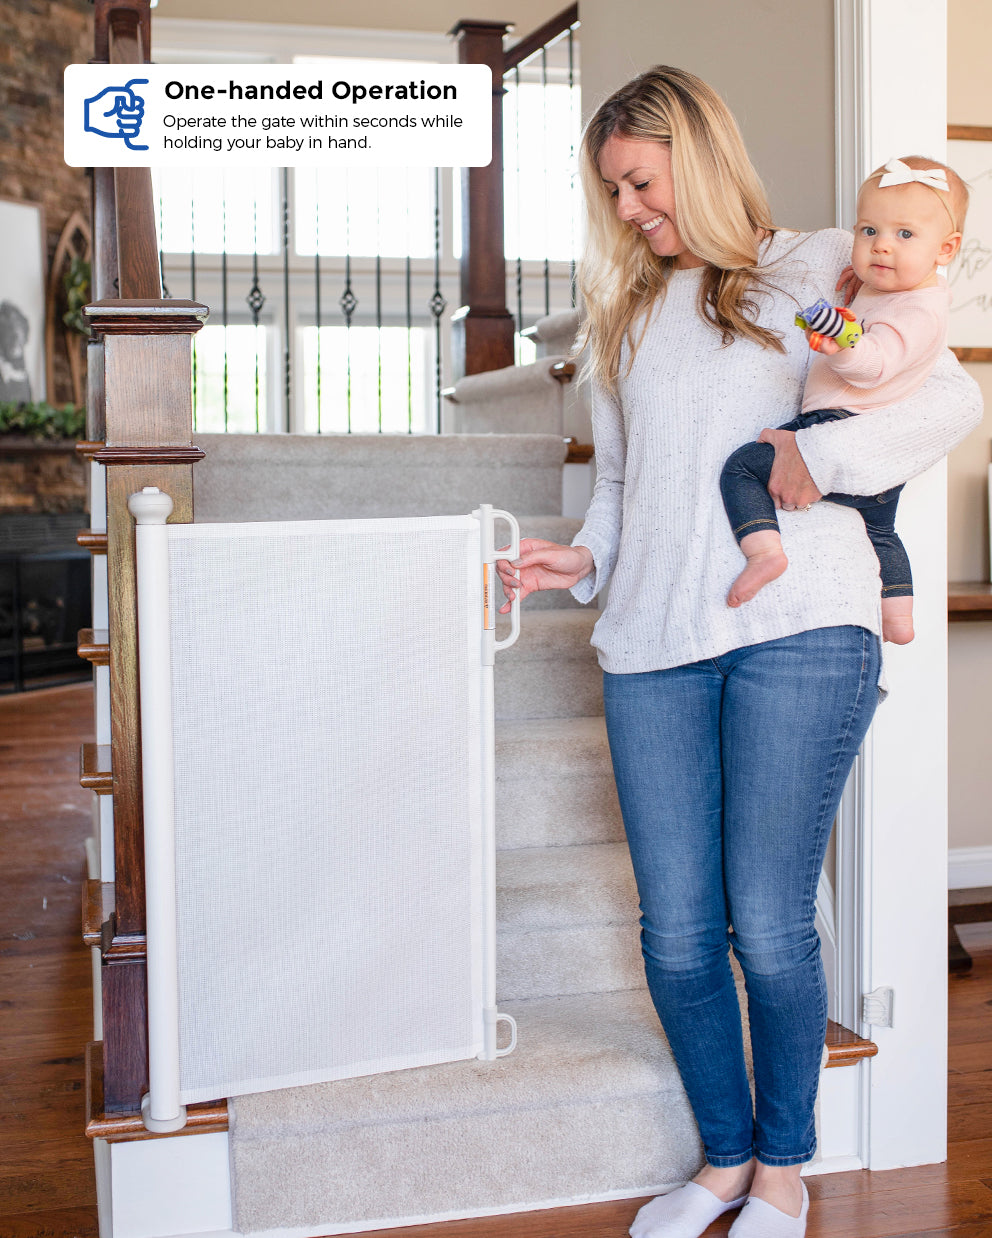 Baby Monitor and Retractable Baby Gate with Mom and Baby